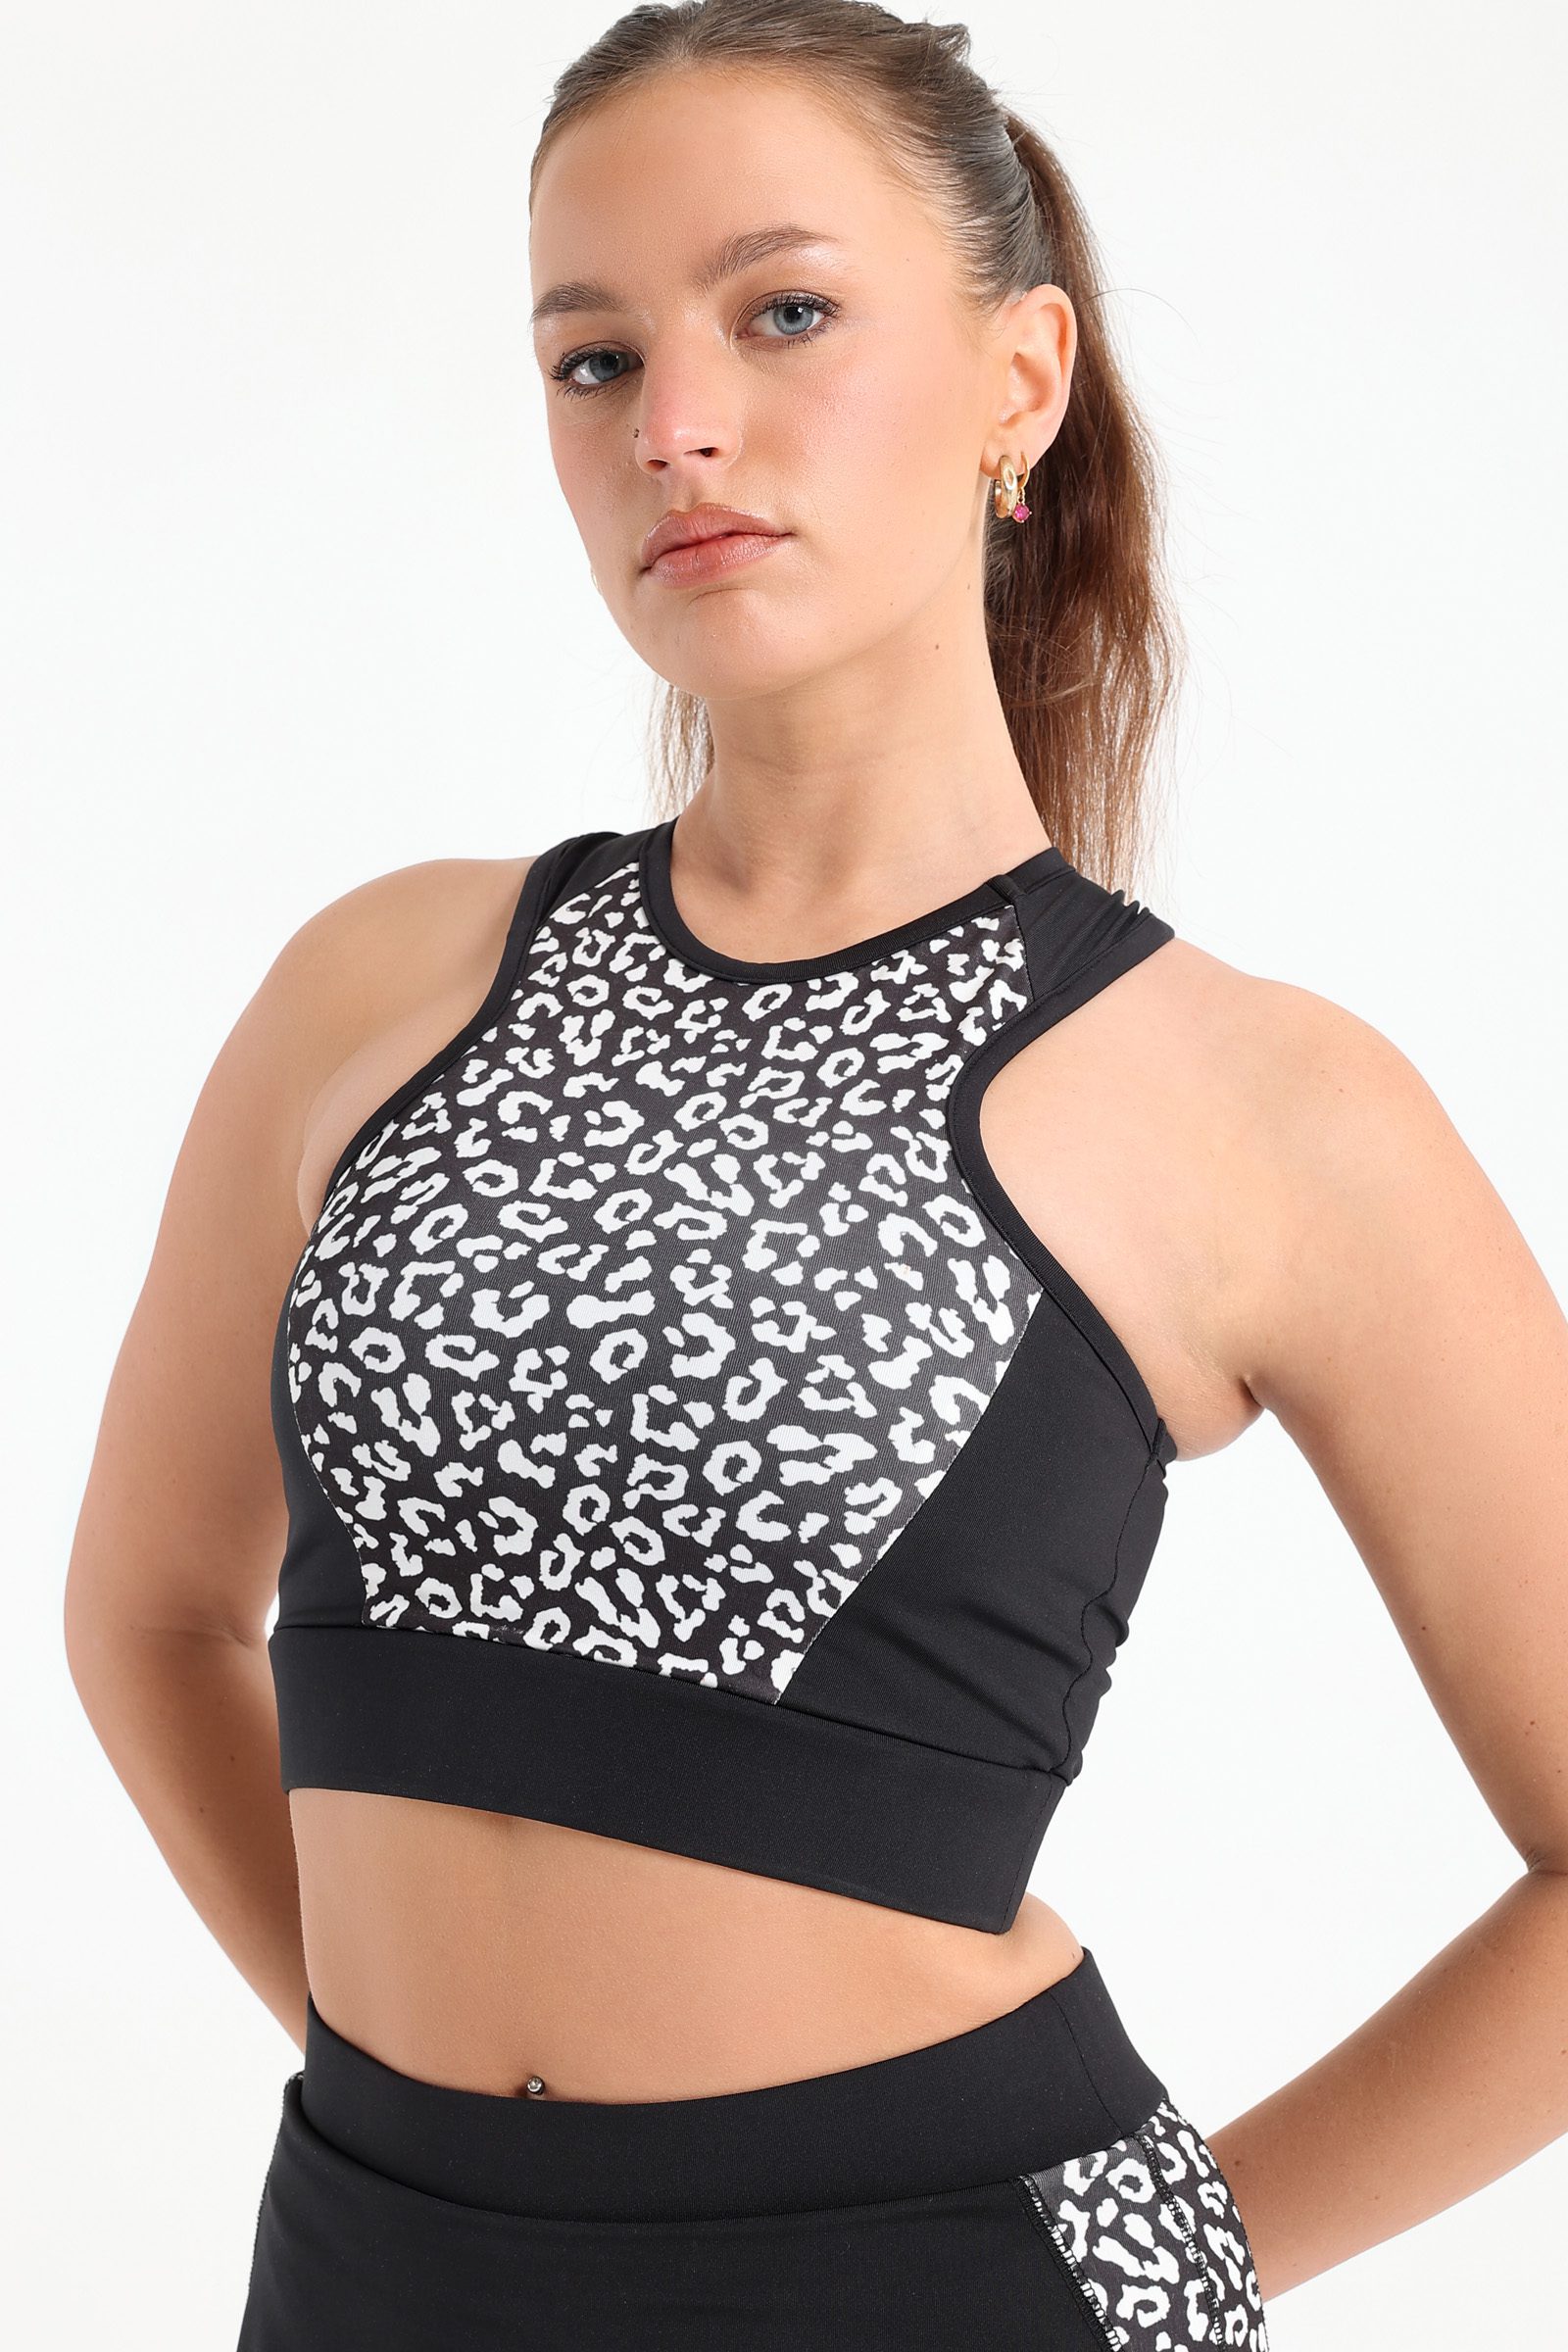 New seamed printed strap detail sports bra that supports you every  move🤸🏻‍♀️. #women #fitfreak #fitness #fitnessmotivation #gym #athletes…